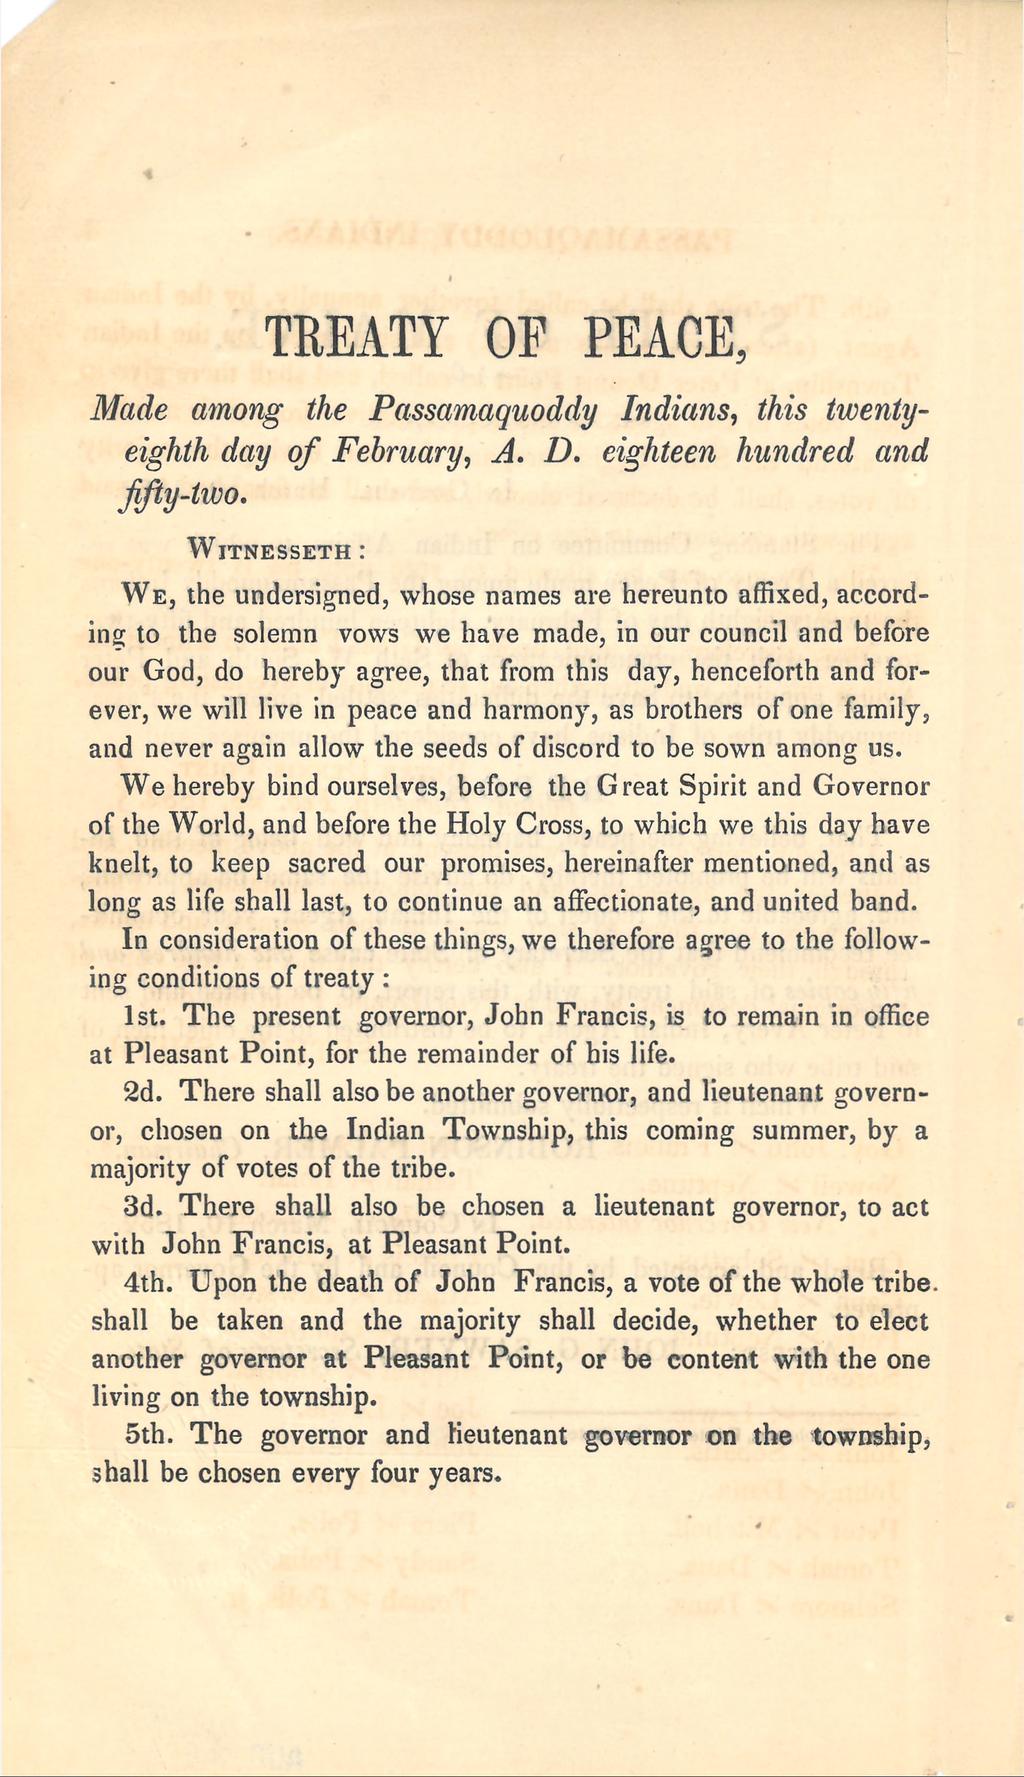 TREATY OF PEACE, Made among the Passamaquoddy Indians, this twentyeighth day o f February, A. D. eighteen hundred and fifty-two.